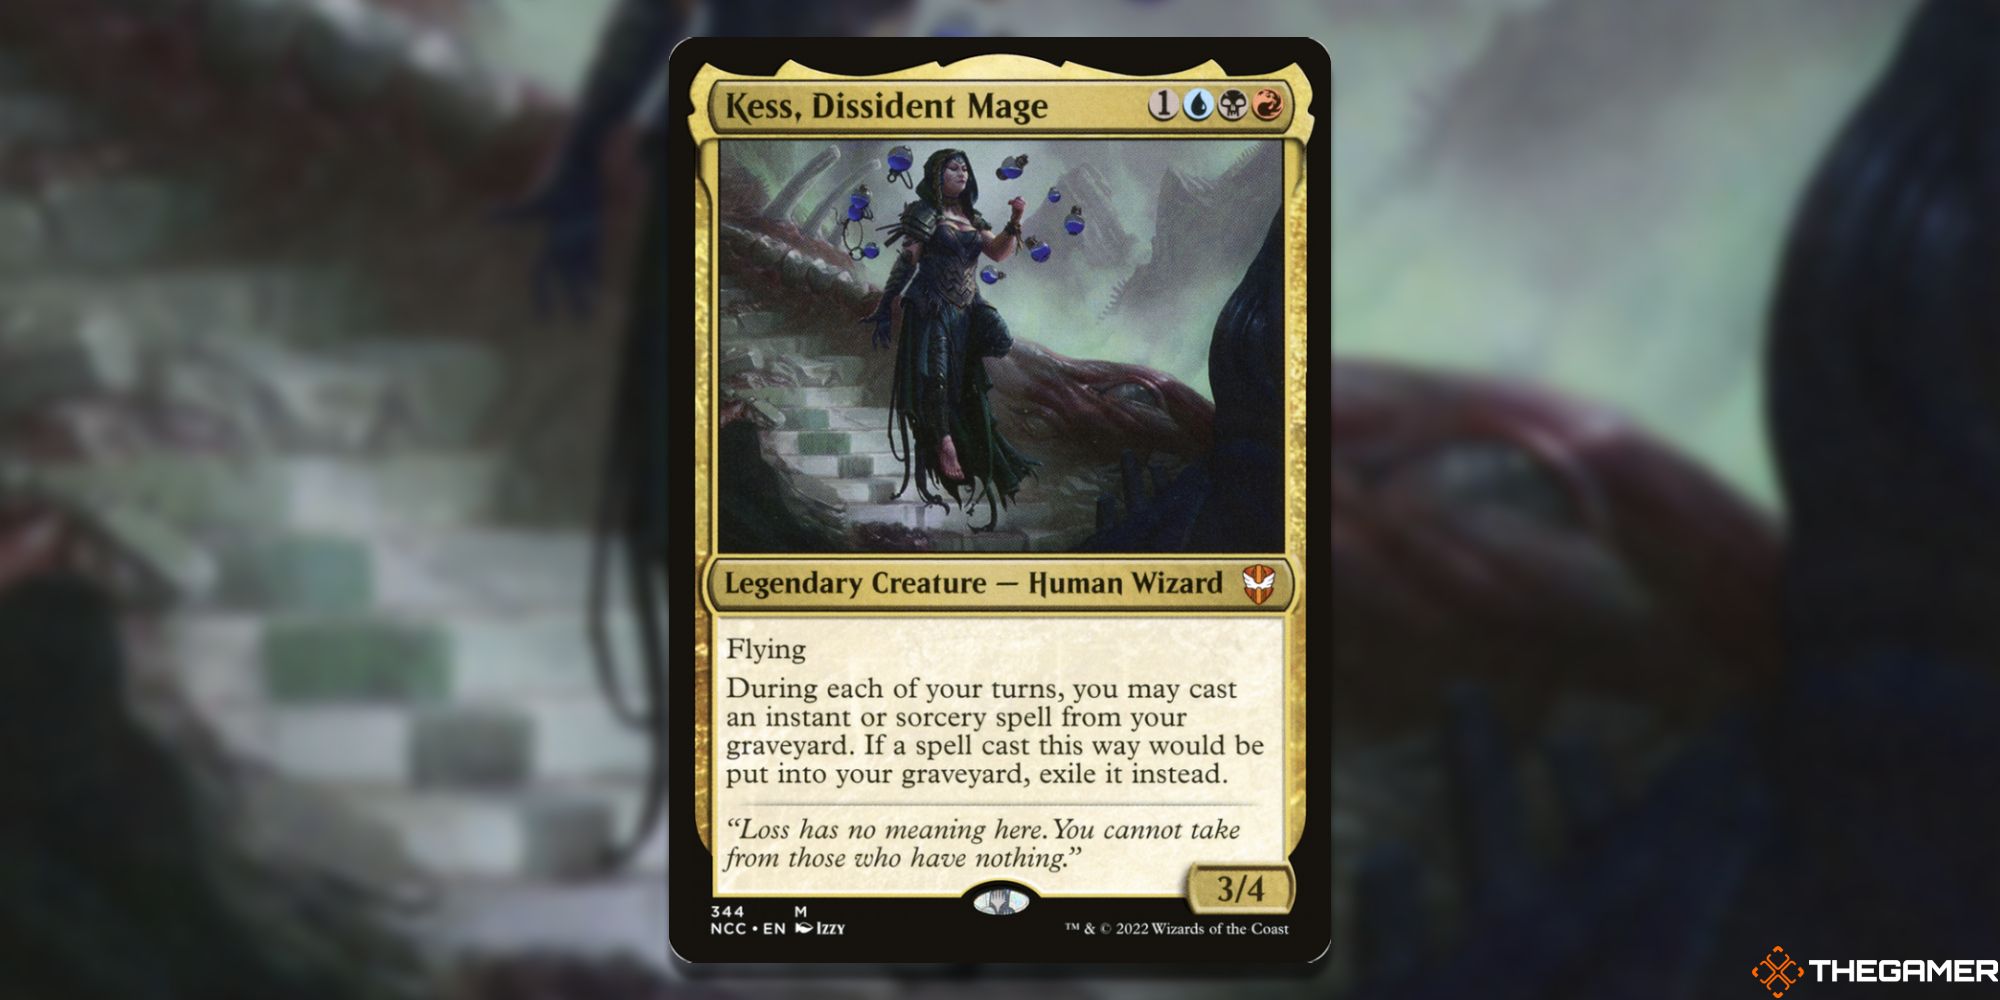 Image of the Kess, Dissident Mage card in Magic: The Gathering, with art by Izzy